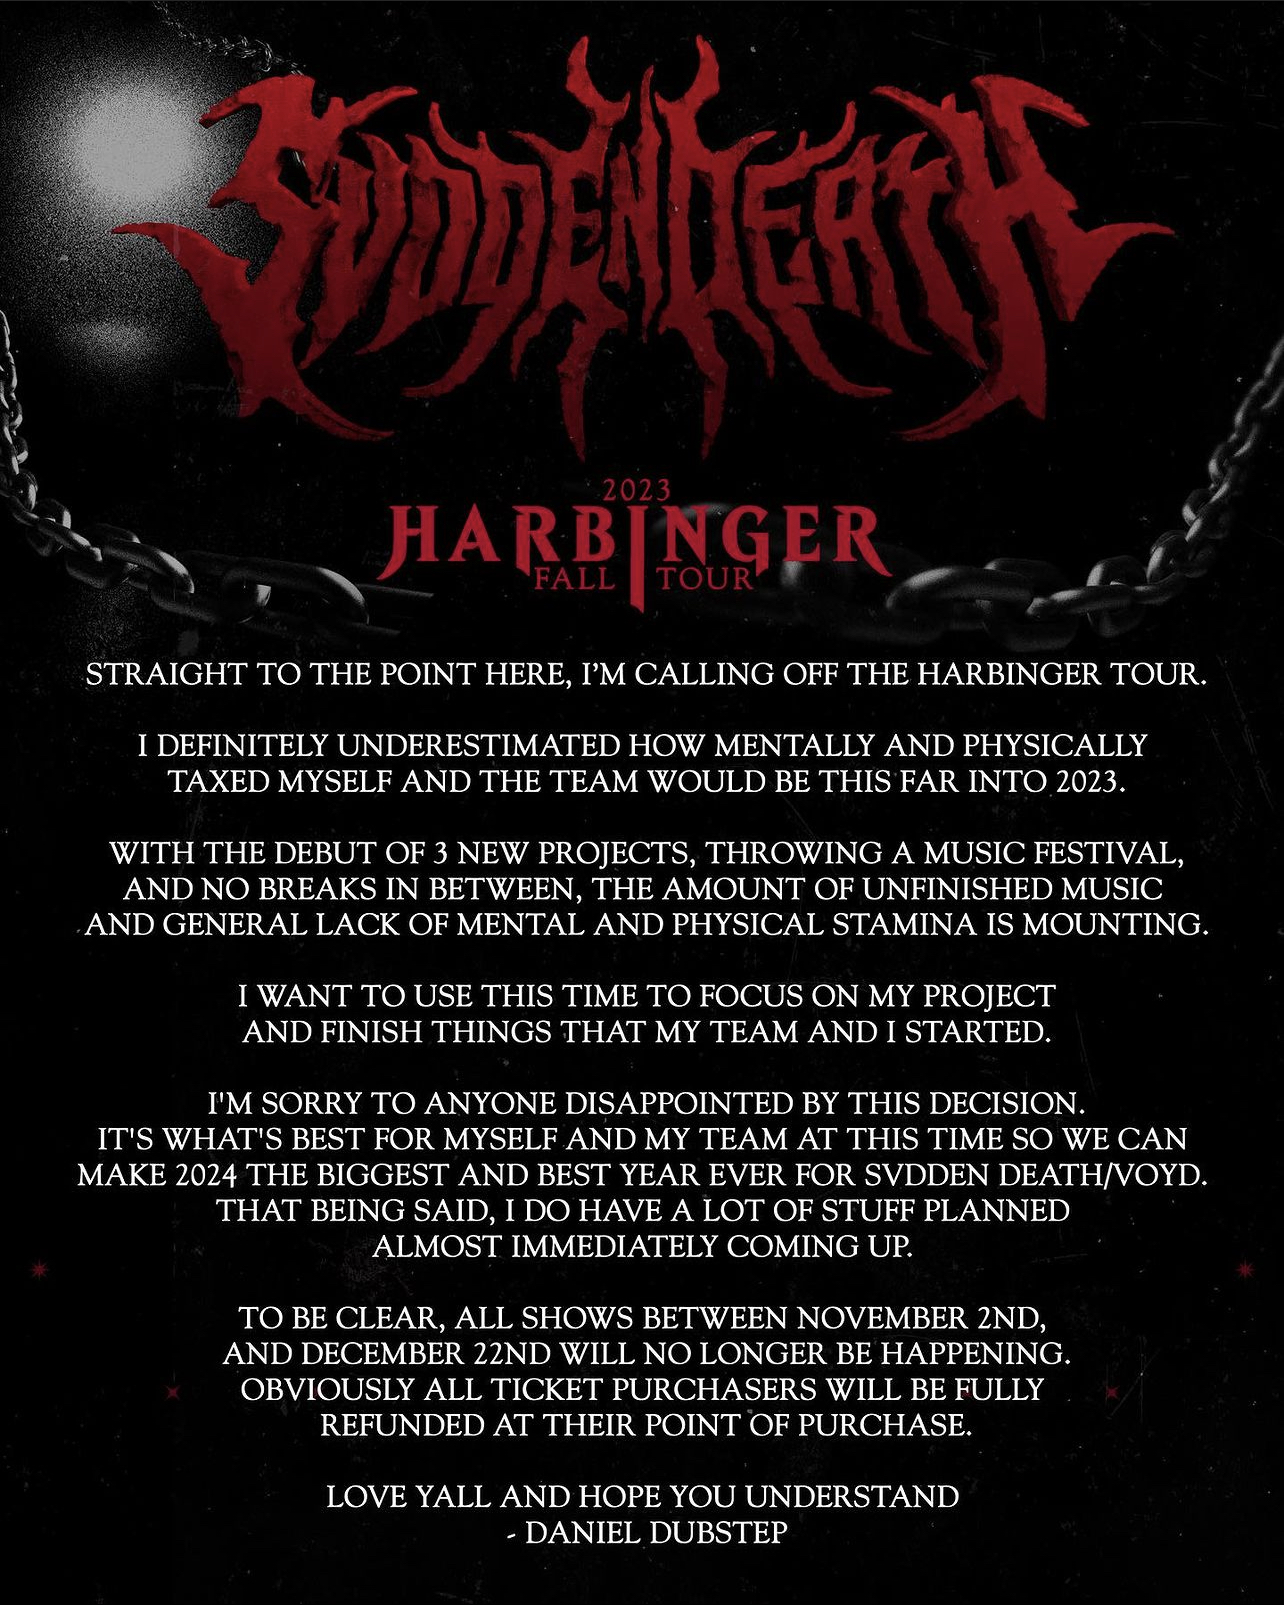 Svdden Death announces the cancelation of his Harbinger Tour due to mental and physical stress.